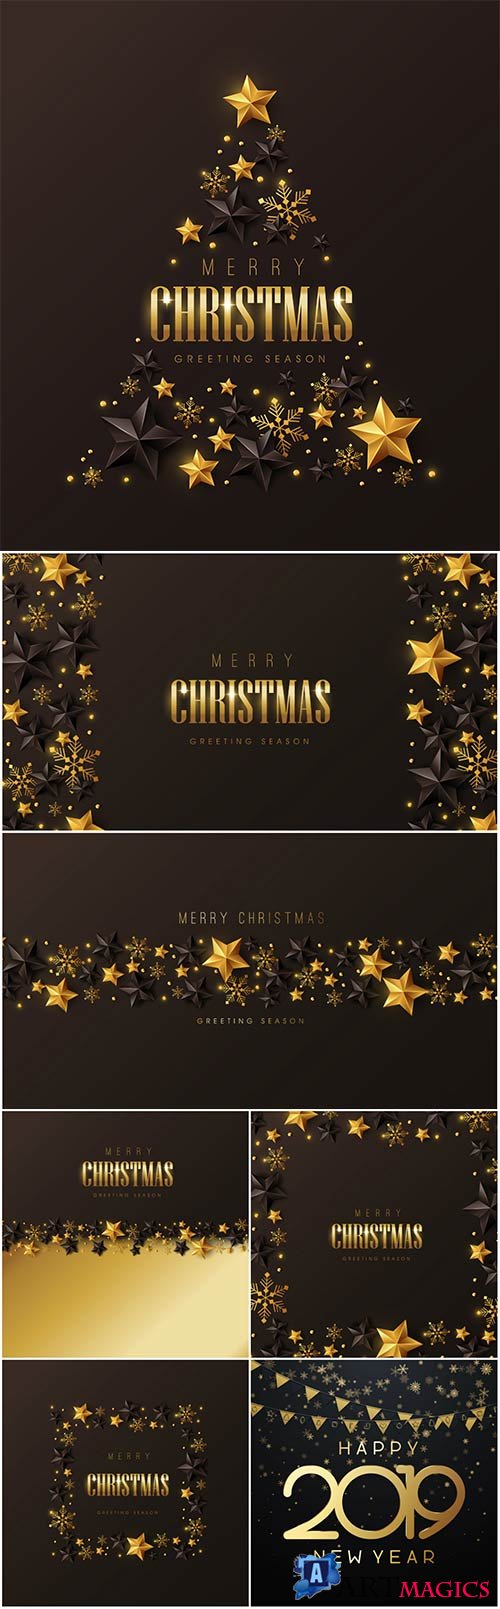 Christmas and New Year vector backgrounds with golden decor